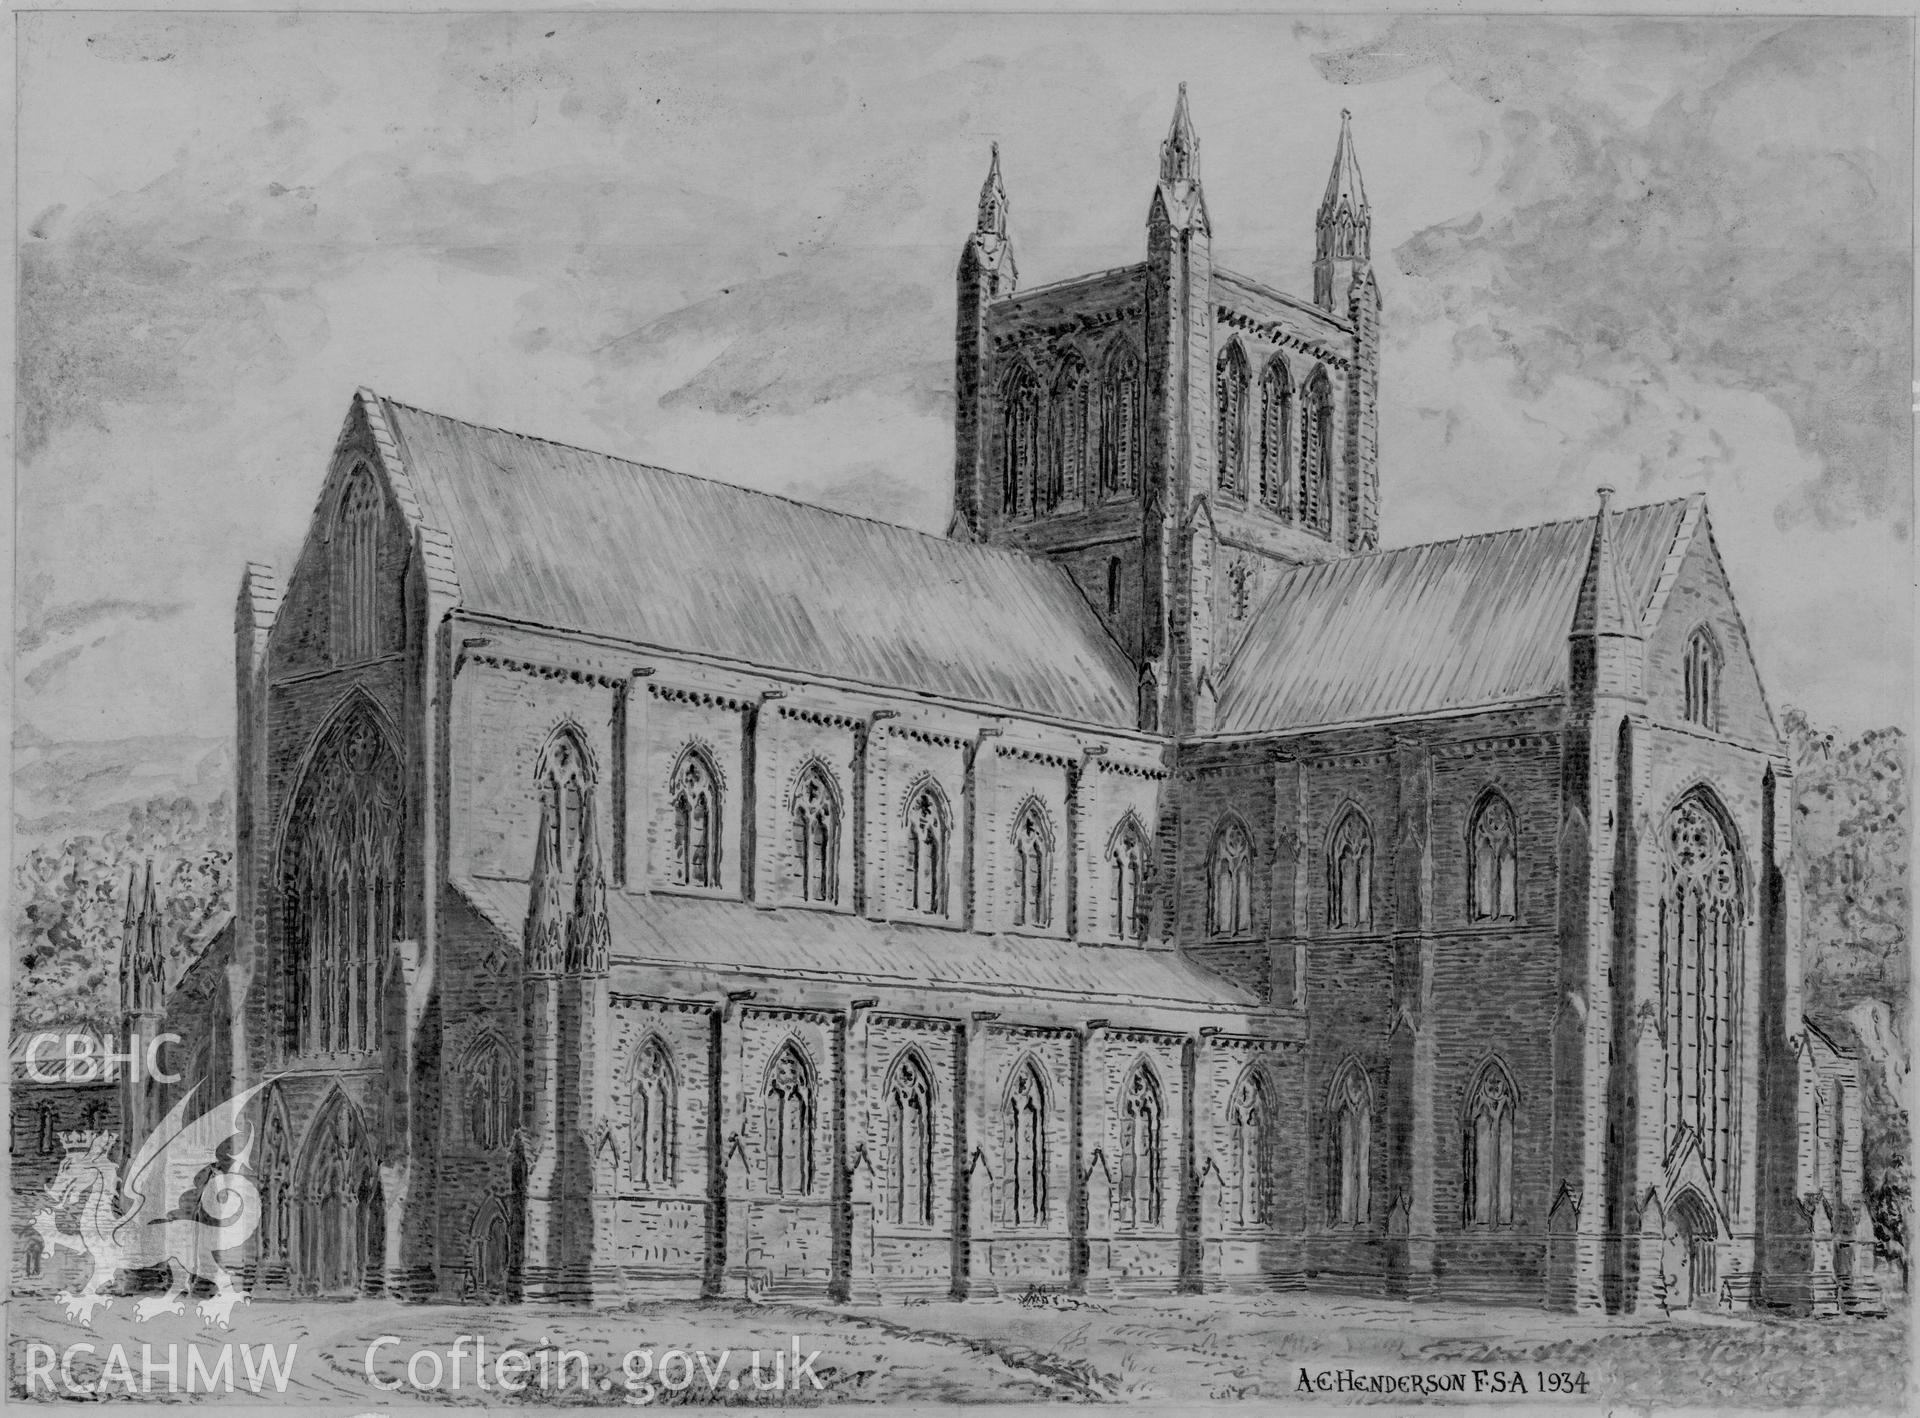 Digital copy of a conjectural reconstruction drawing of 'Tintern Abbey as Erected: Nave & South Transept Exterior' produced by Arthur E. Henderson, 1934.